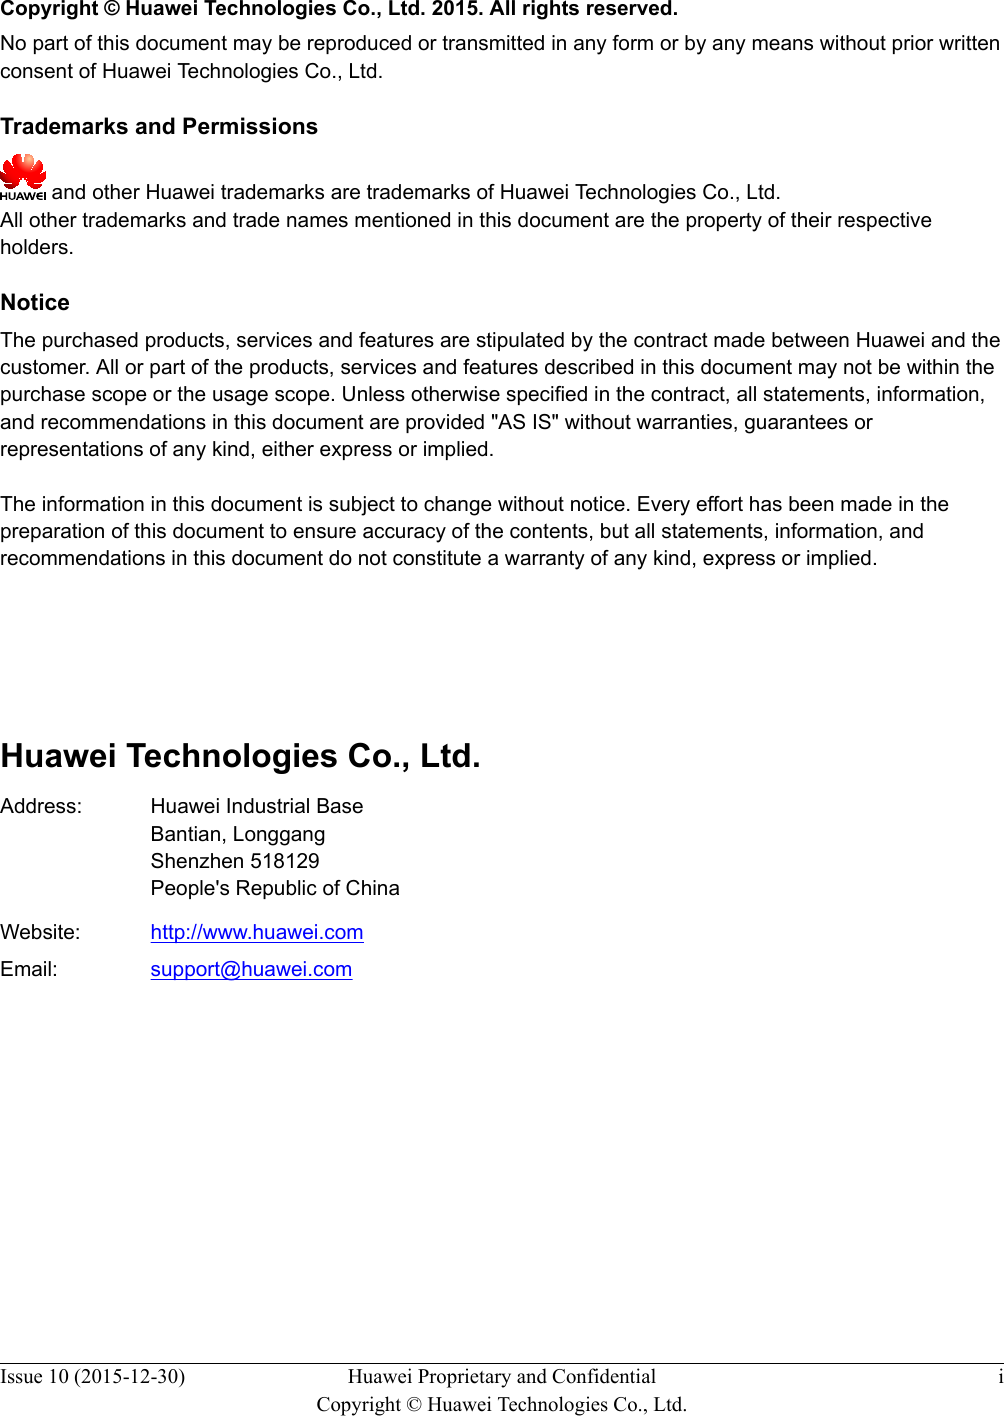   Copyright © Huawei Technologies Co., Ltd. 2015. All rights reserved.No part of this document may be reproduced or transmitted in any form or by any means without prior writtenconsent of Huawei Technologies Co., Ltd. Trademarks and Permissions and other Huawei trademarks are trademarks of Huawei Technologies Co., Ltd.All other trademarks and trade names mentioned in this document are the property of their respectiveholders. NoticeThe purchased products, services and features are stipulated by the contract made between Huawei and thecustomer. All or part of the products, services and features described in this document may not be within thepurchase scope or the usage scope. Unless otherwise specified in the contract, all statements, information,and recommendations in this document are provided &quot;AS IS&quot; without warranties, guarantees orrepresentations of any kind, either express or implied.The information in this document is subject to change without notice. Every effort has been made in thepreparation of this document to ensure accuracy of the contents, but all statements, information, andrecommendations in this document do not constitute a warranty of any kind, express or implied.        Huawei Technologies Co., Ltd.Address: Huawei Industrial BaseBantian, LonggangShenzhen 518129People&apos;s Republic of ChinaWebsite: http://www.huawei.comEmail: support@huawei.comIssue 10 (2015-12-30) Huawei Proprietary and ConfidentialCopyright © Huawei Technologies Co., Ltd.i